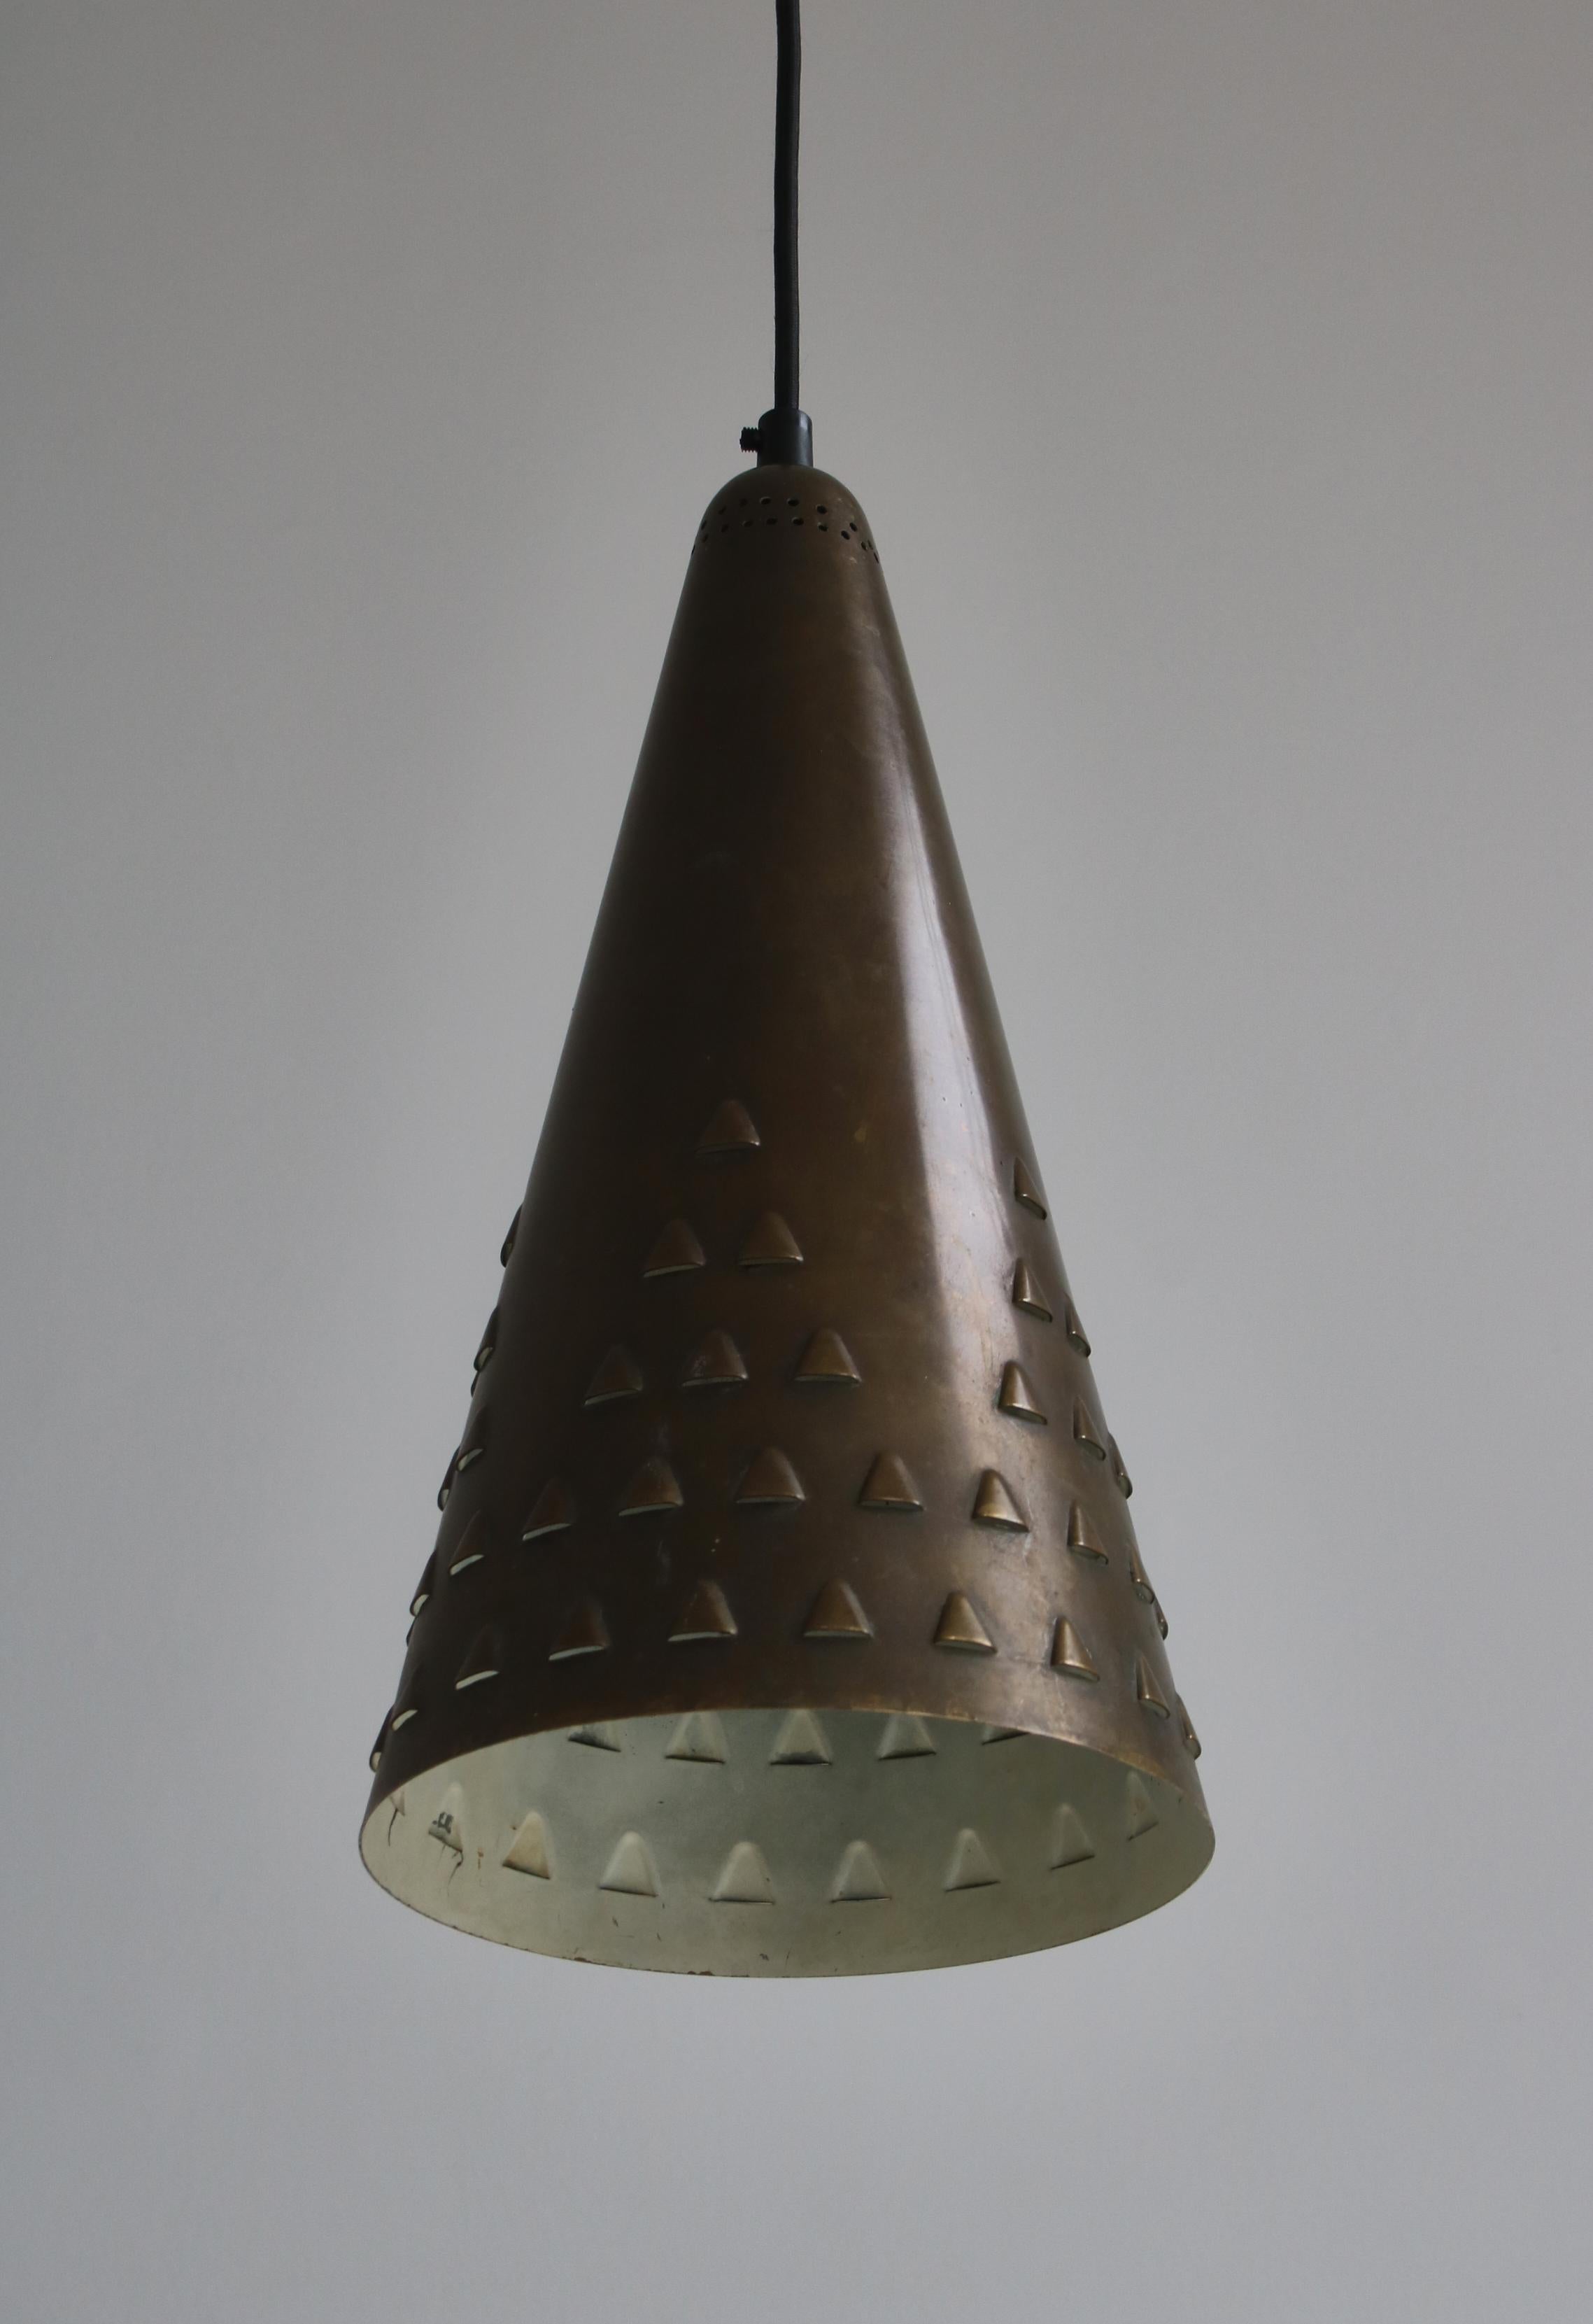 Large Pendants in Patinated Brass by Brockmann-Petersen, Danish Modern, 1953 For Sale 4